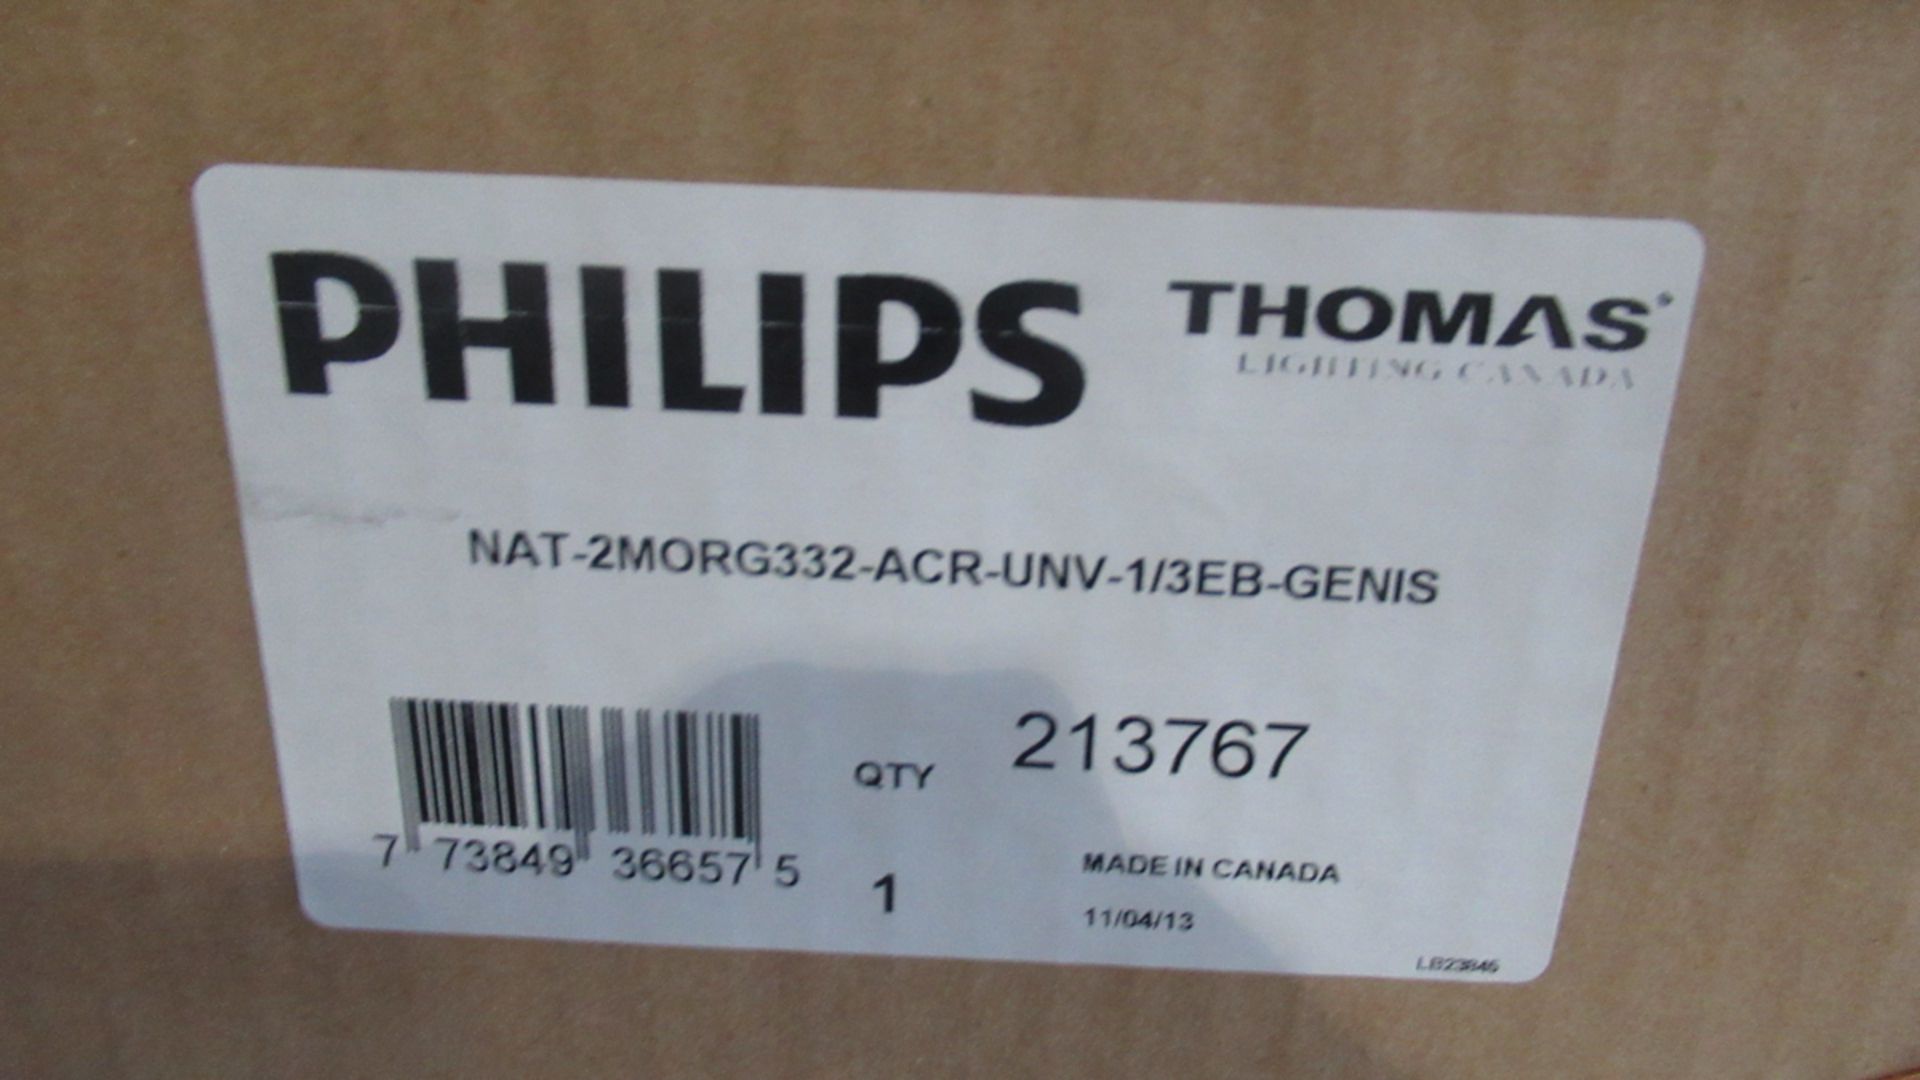 fixtures PHILIPS NAT-2MORG332-ACR-UNV-1/3-eb-genis - Image 2 of 2